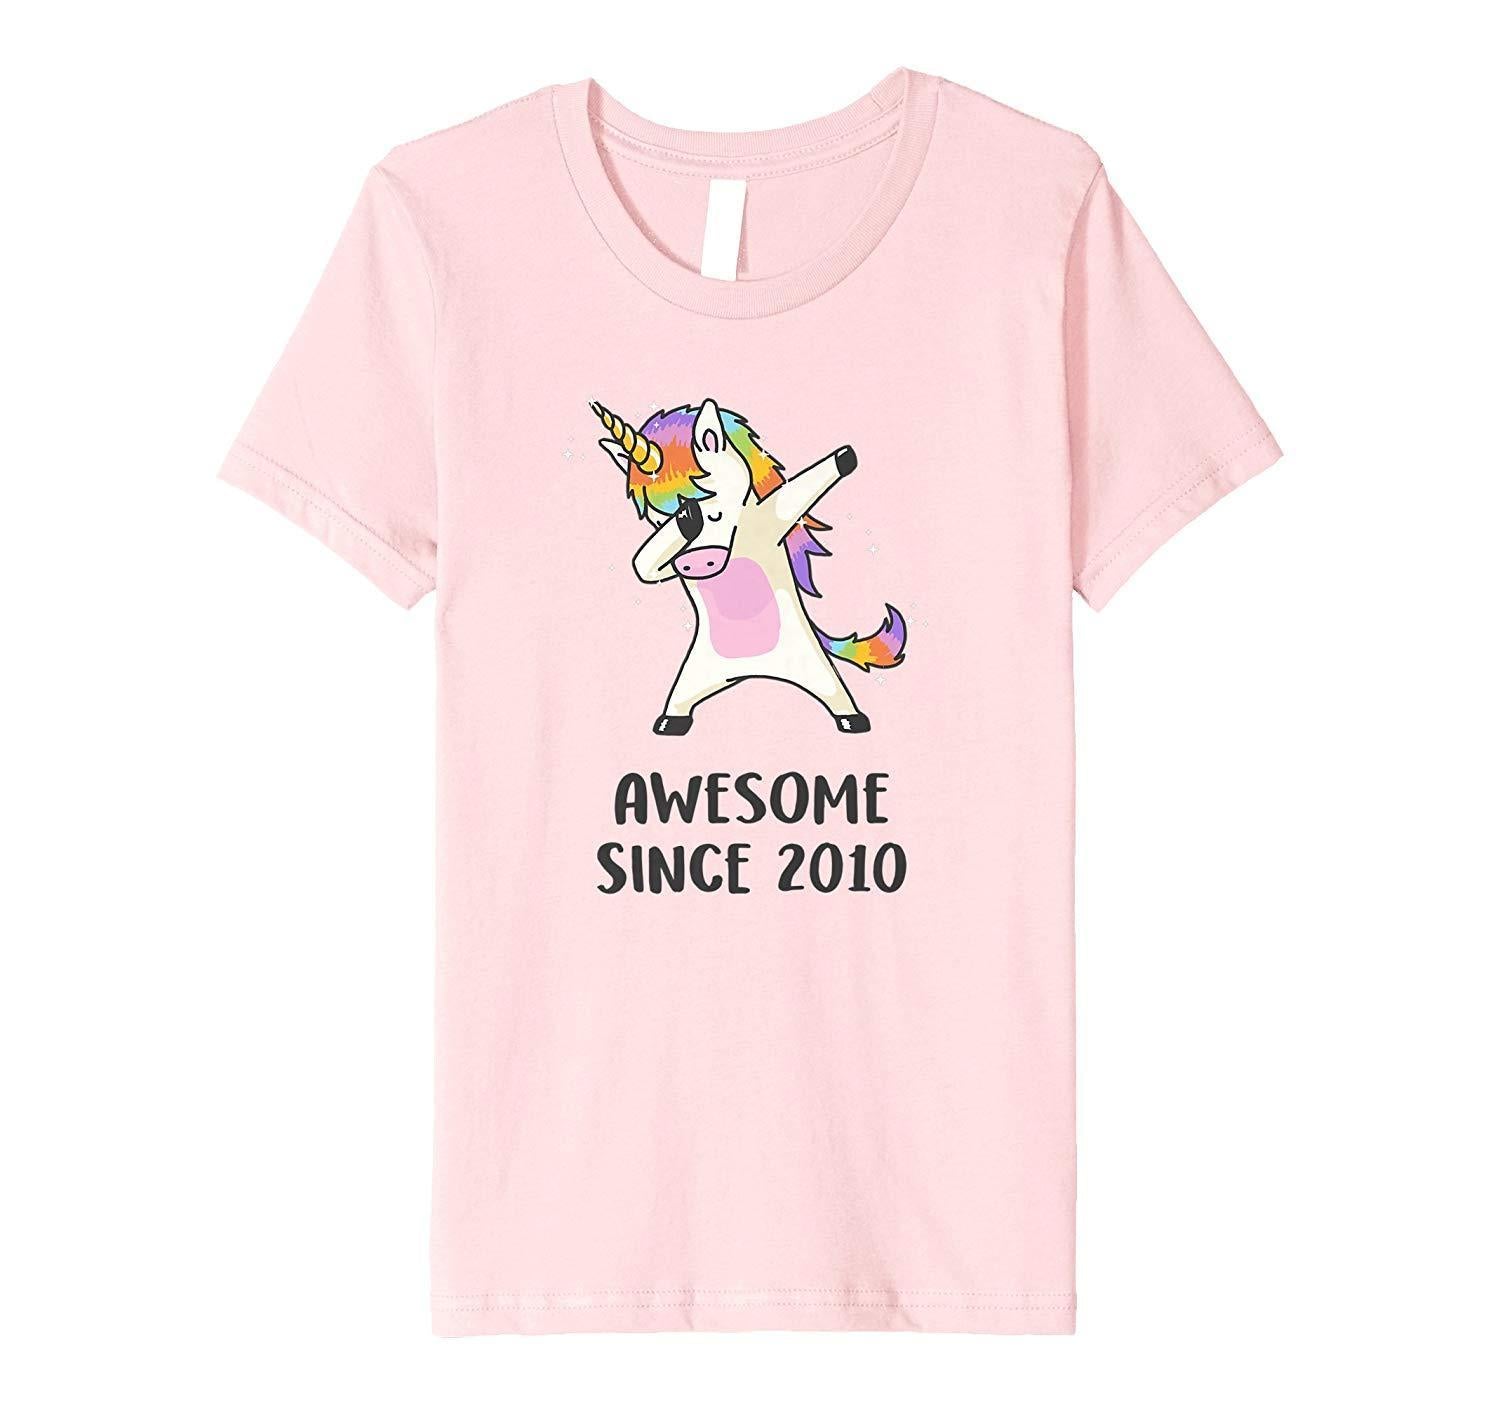 Check Out This Awesome Dabbing Unicorn Shirt Awesome Since 2010 8th Bi